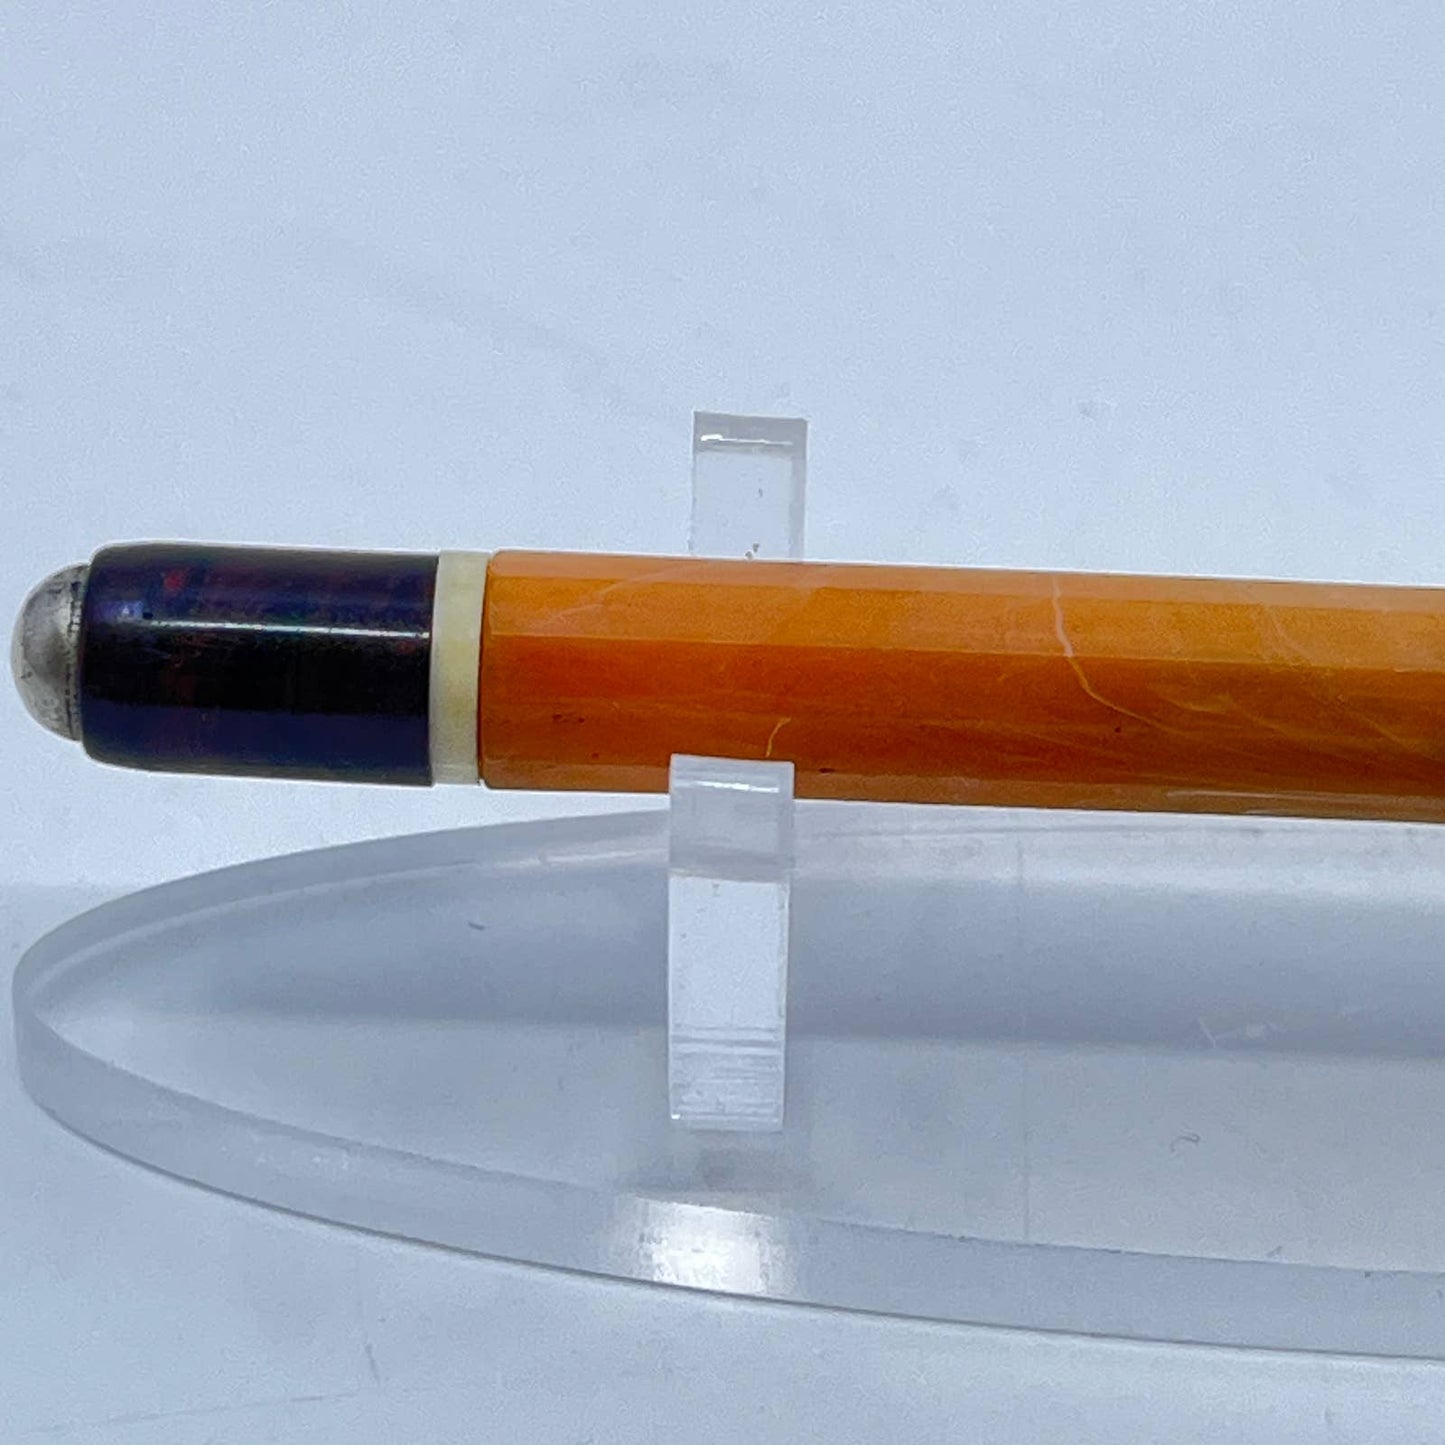 Vintage Mechanical Pencil Celluloid Apricot and Wood Tone SD7